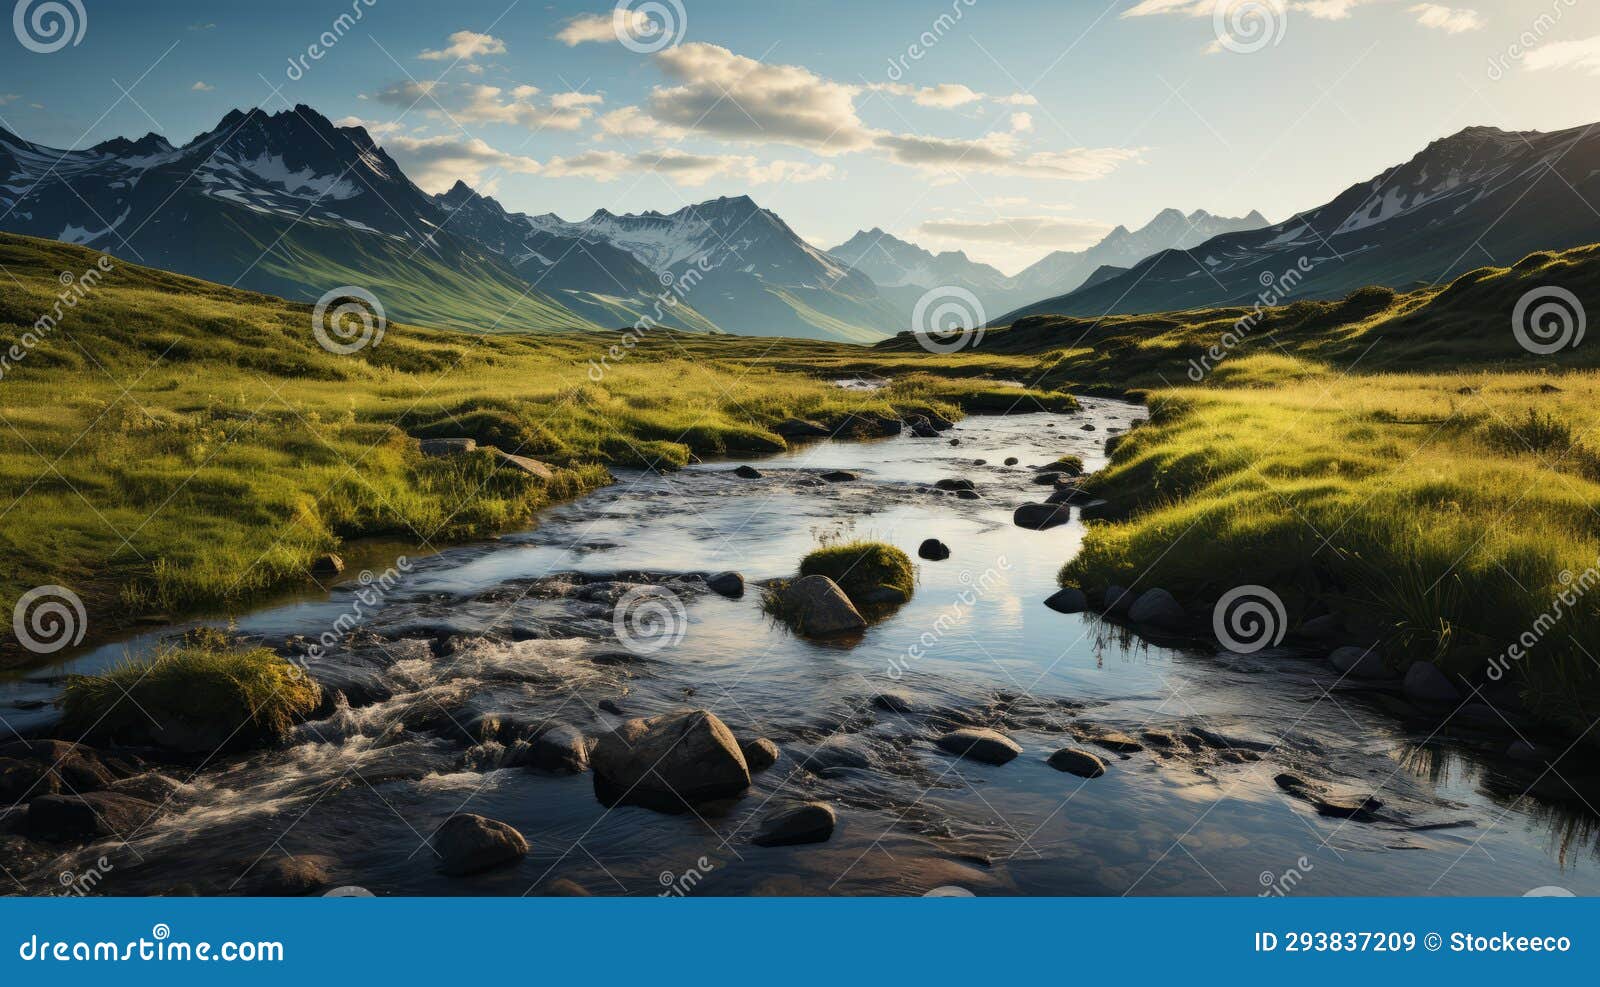 romantic landscape vistas: grass-covered stream in the mountains